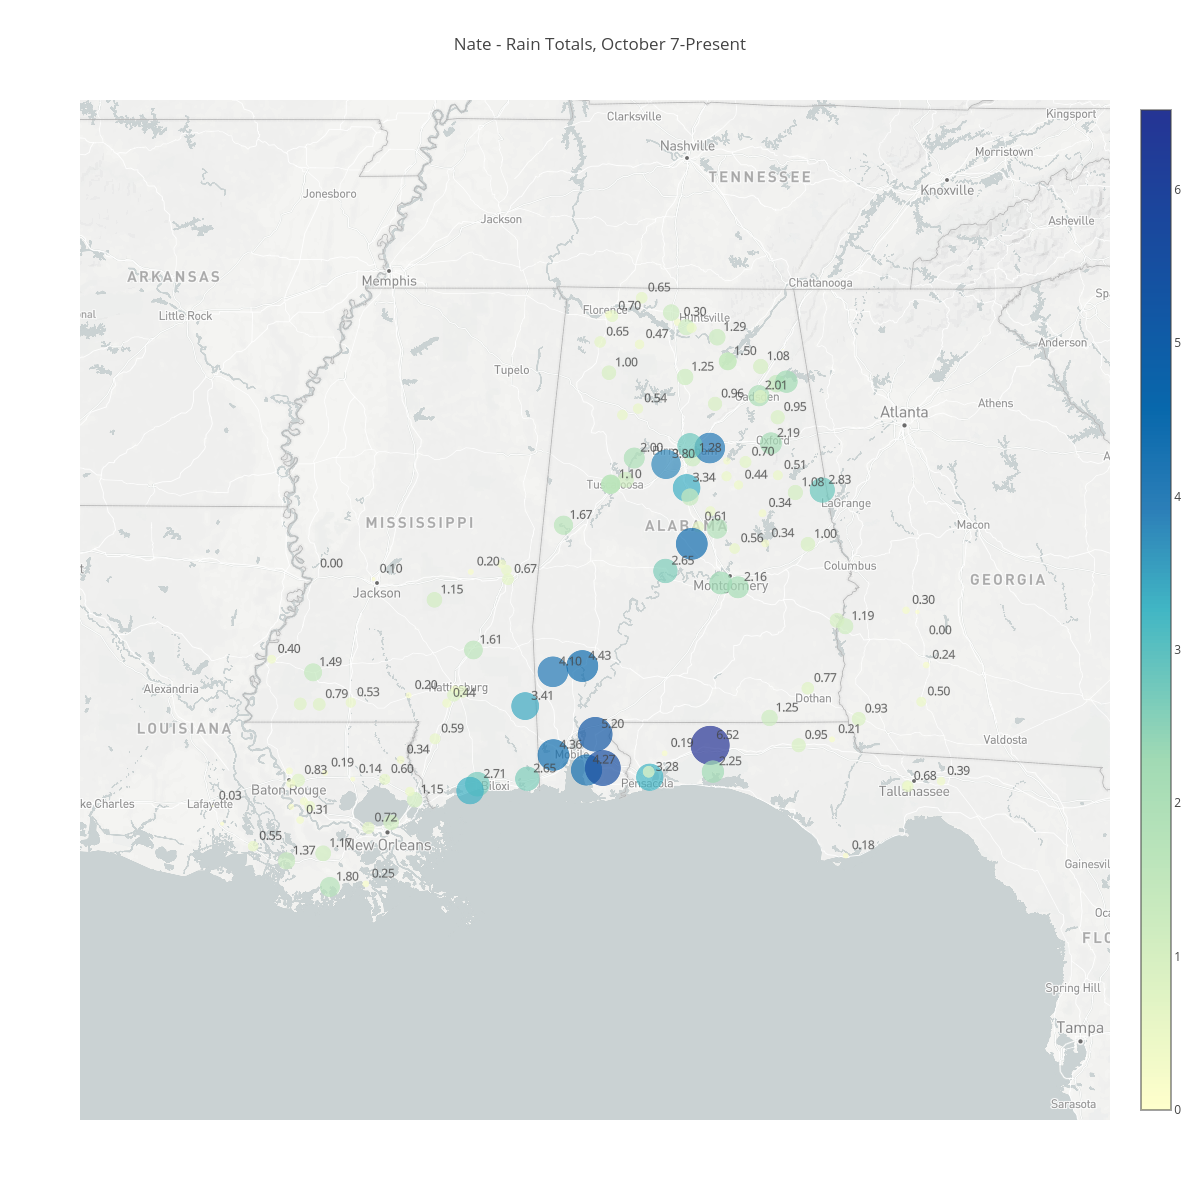 Nate - Rain Totals, October 7-Present | scattermapbox made by Bigdata153 | plotly